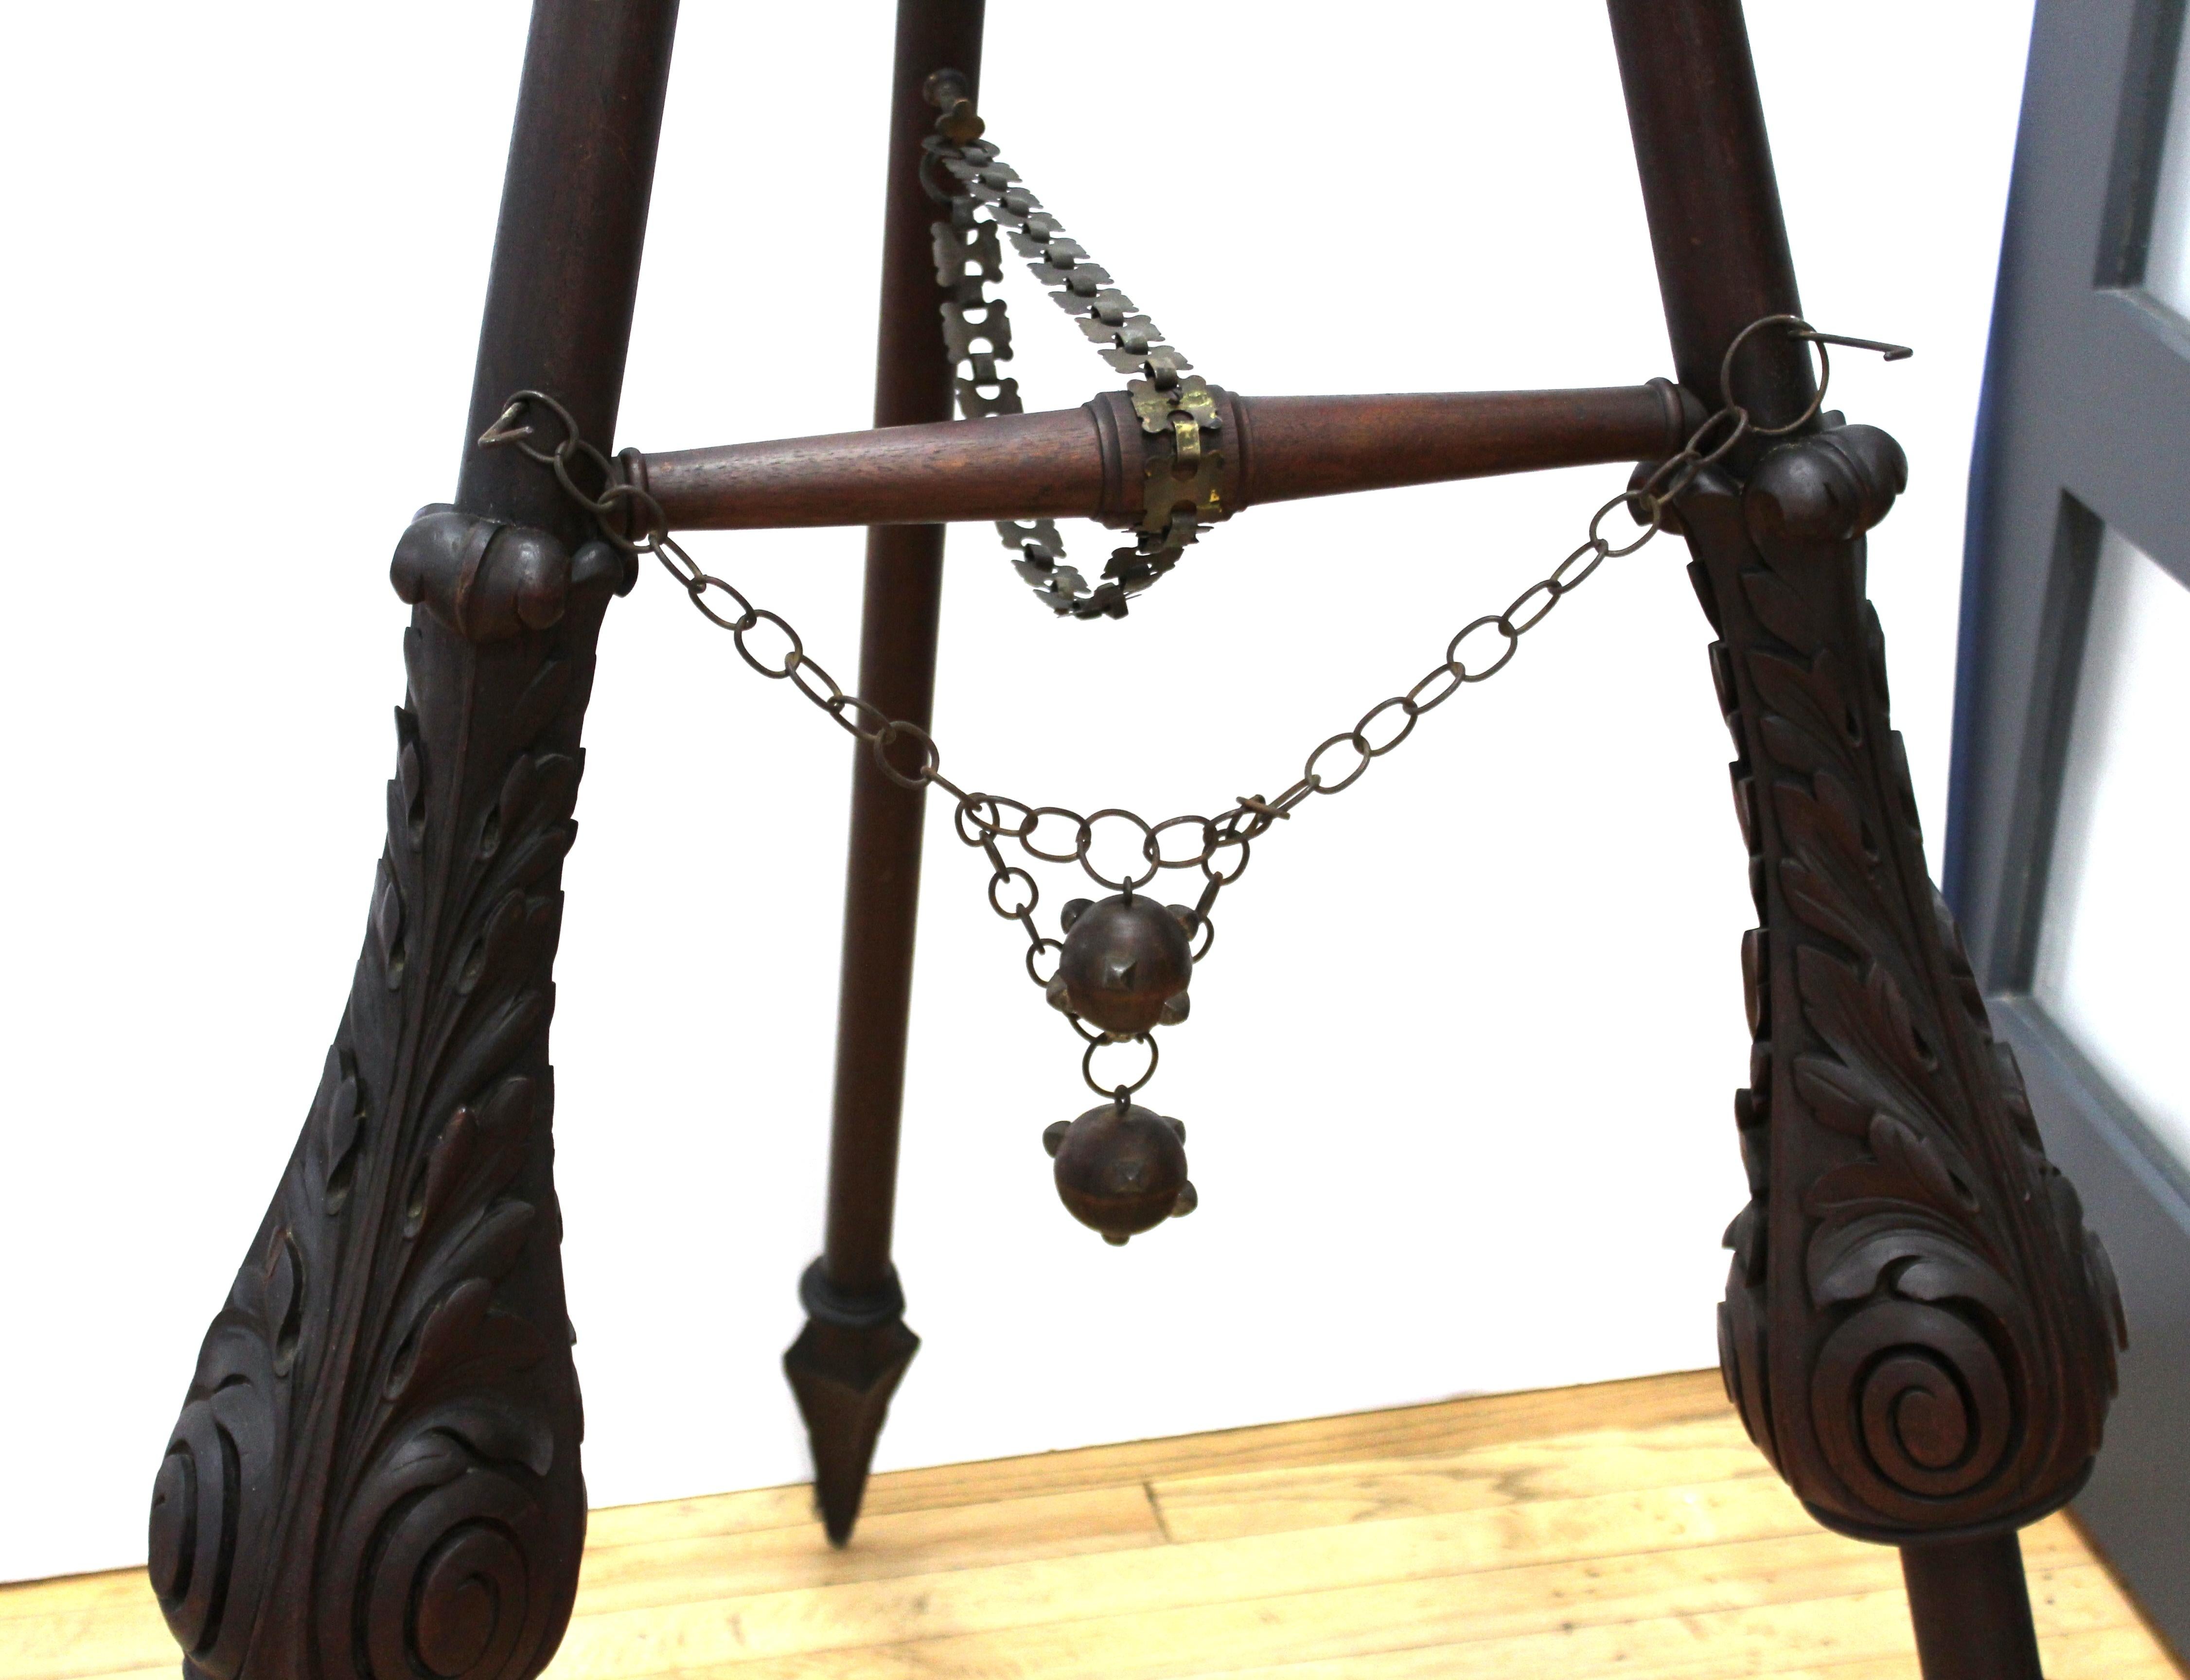 Metal Italian Renaissance Revival Easel with Jousting Lances & Knight Helmet Finial For Sale